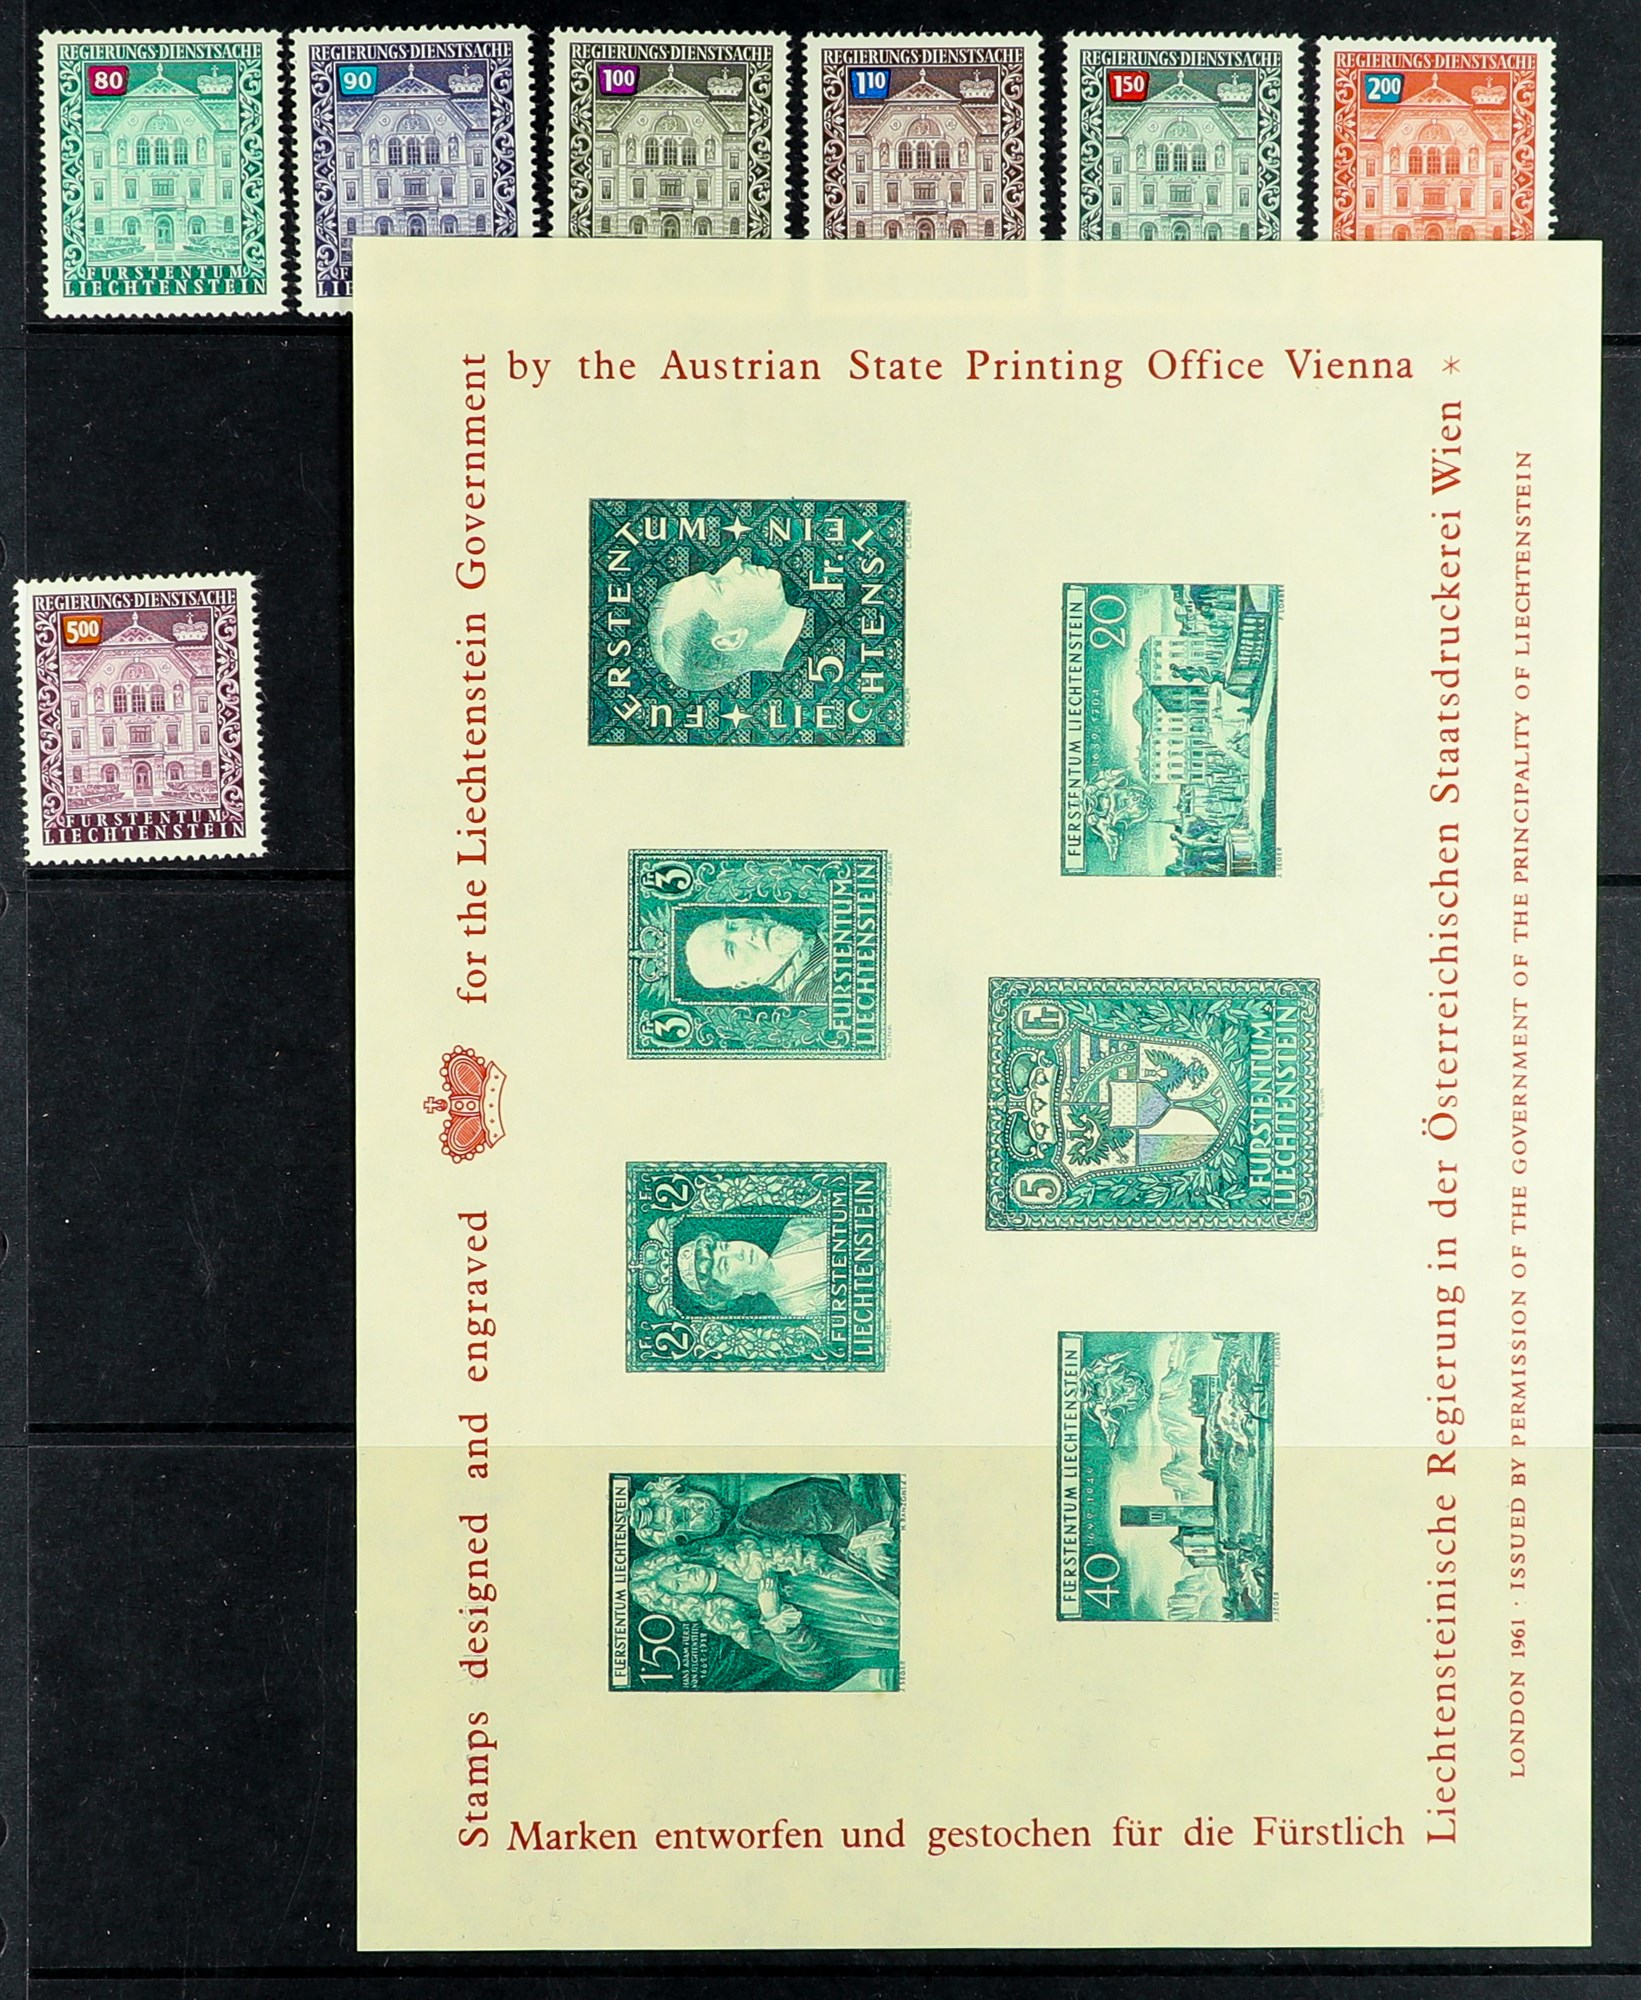 LIECHTENSTEIN 1938 - 1993 COLLECTION of 650+ never hinged mint stamps & 15 miniature sheets on - Image 11 of 11